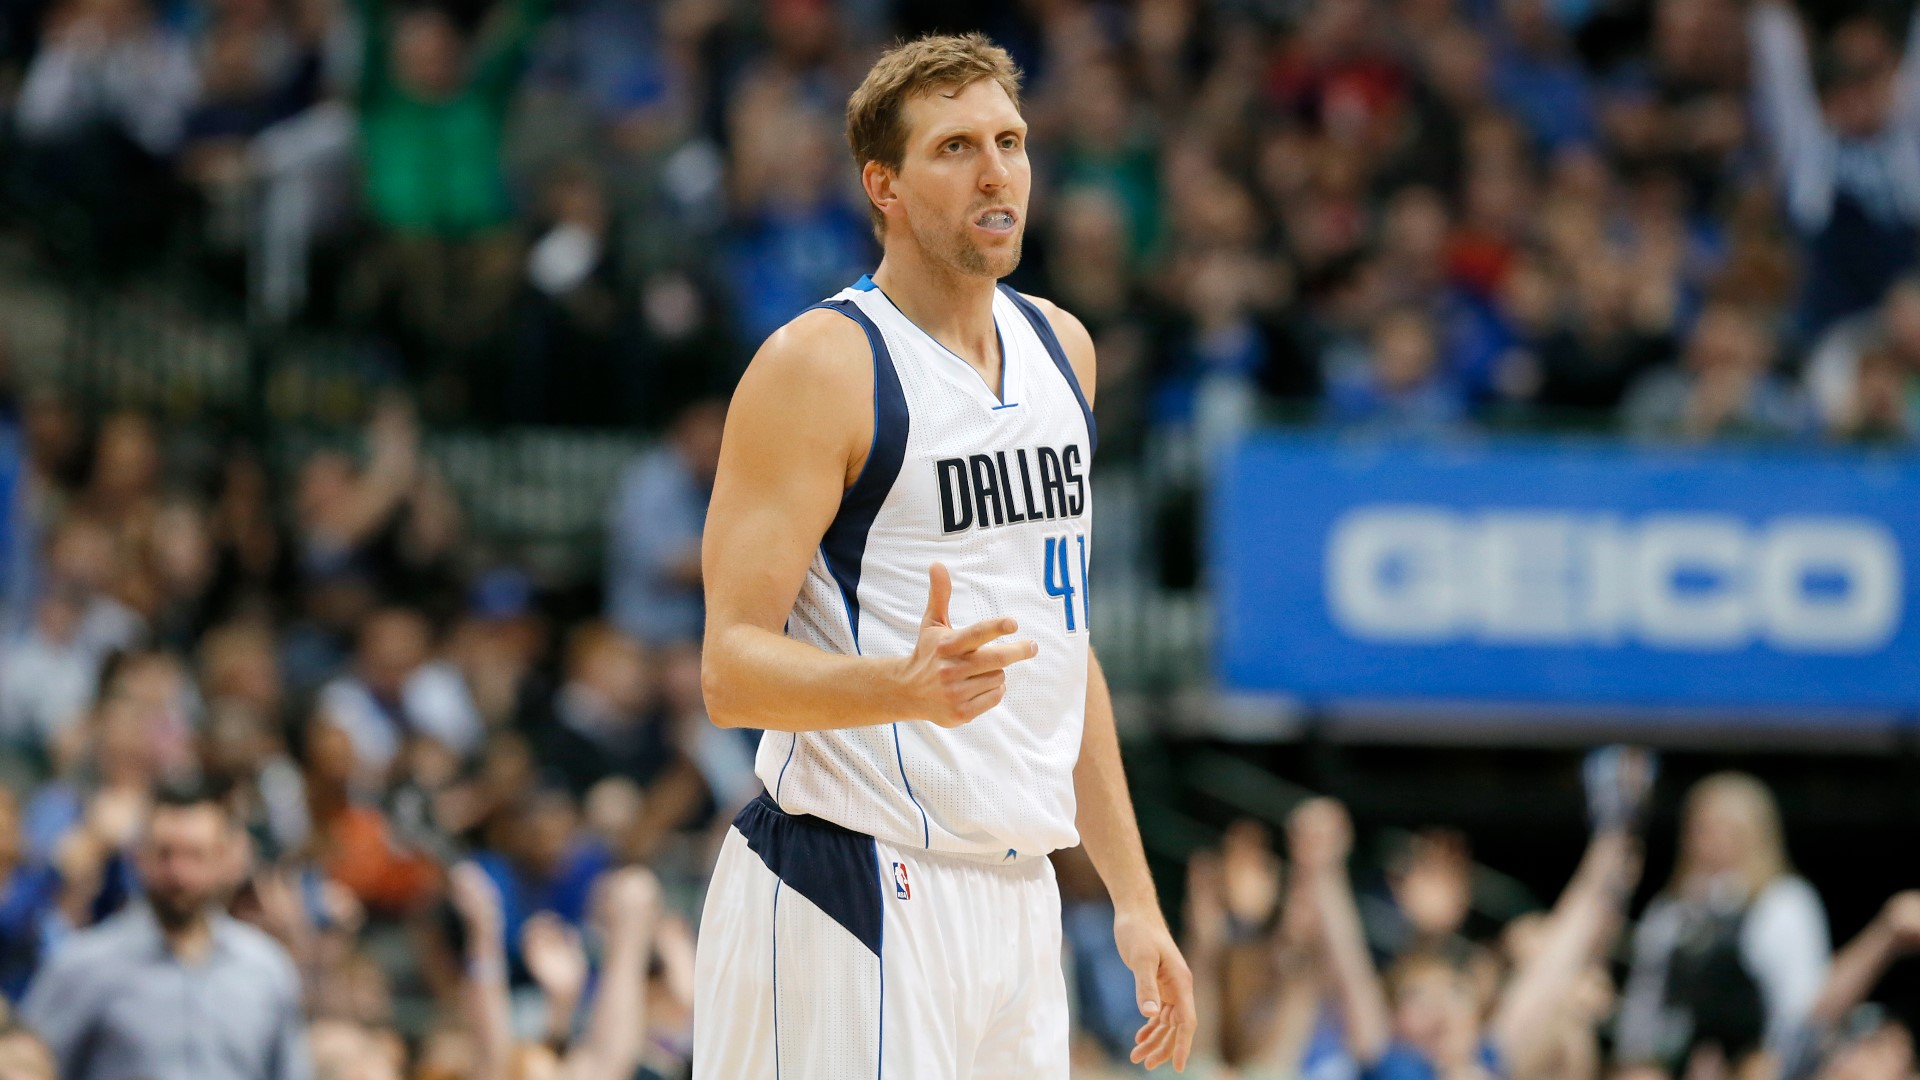 The Dallas Mavericks announced Friday that long-time Maverick Dirk Nowitzki will be re-joining the team as a special advisor.